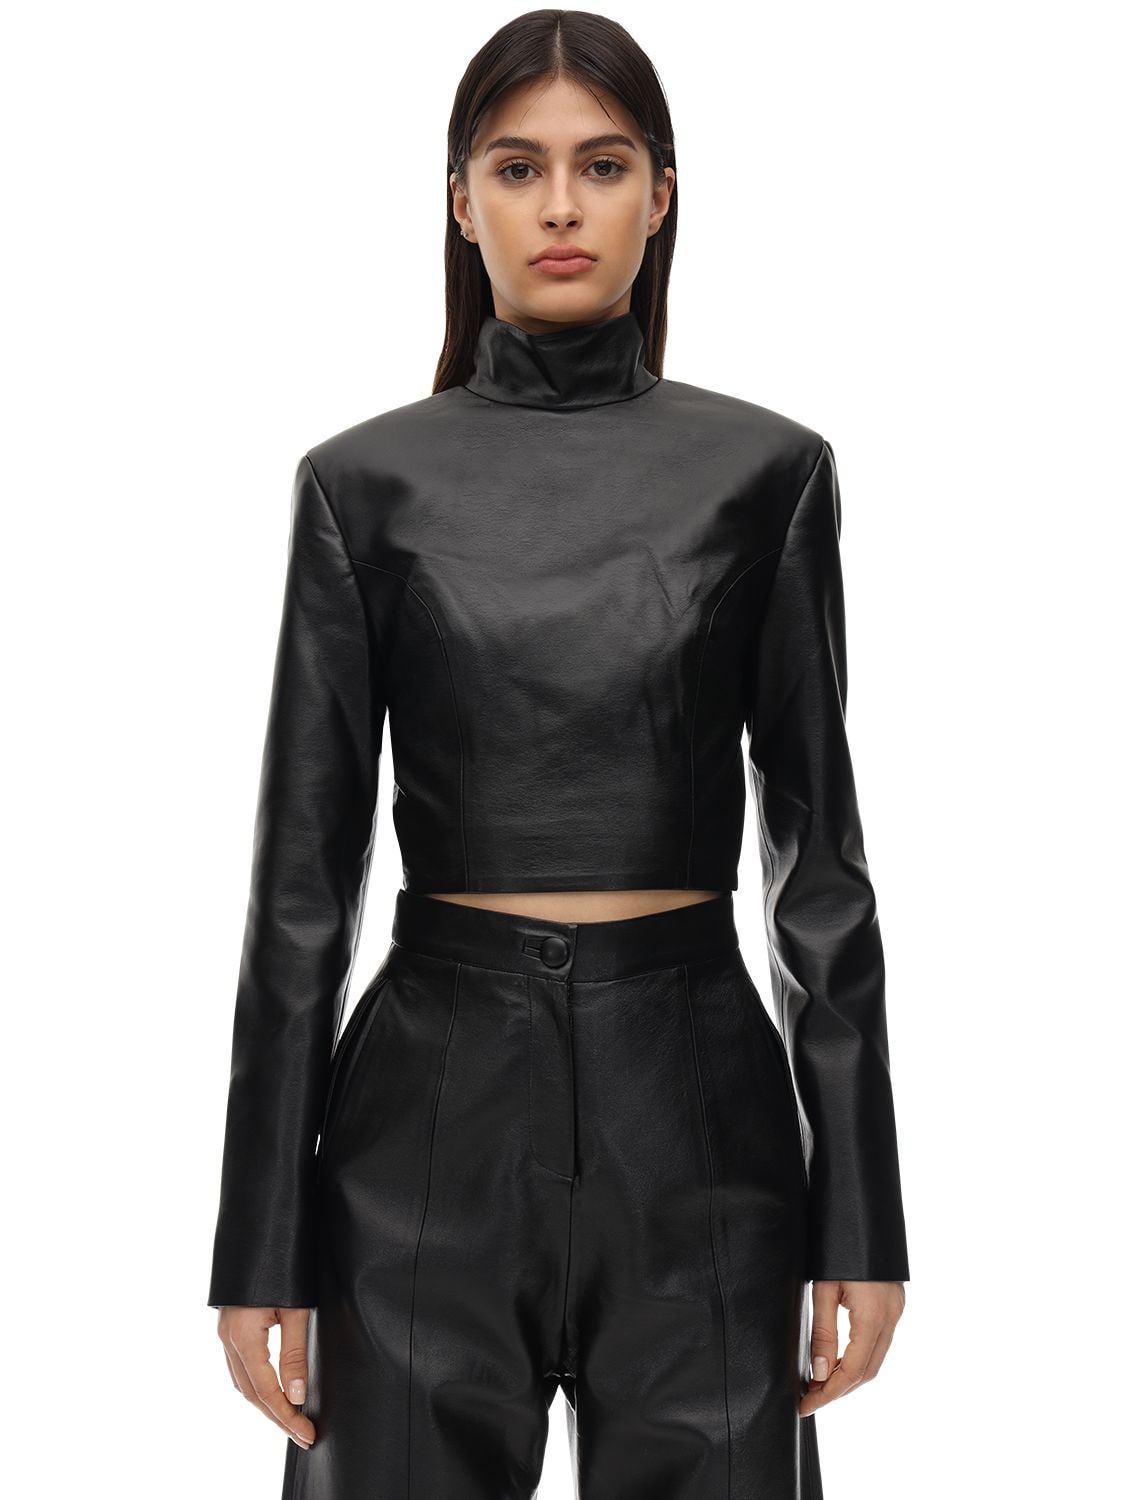 Cropped Faux Leather Top